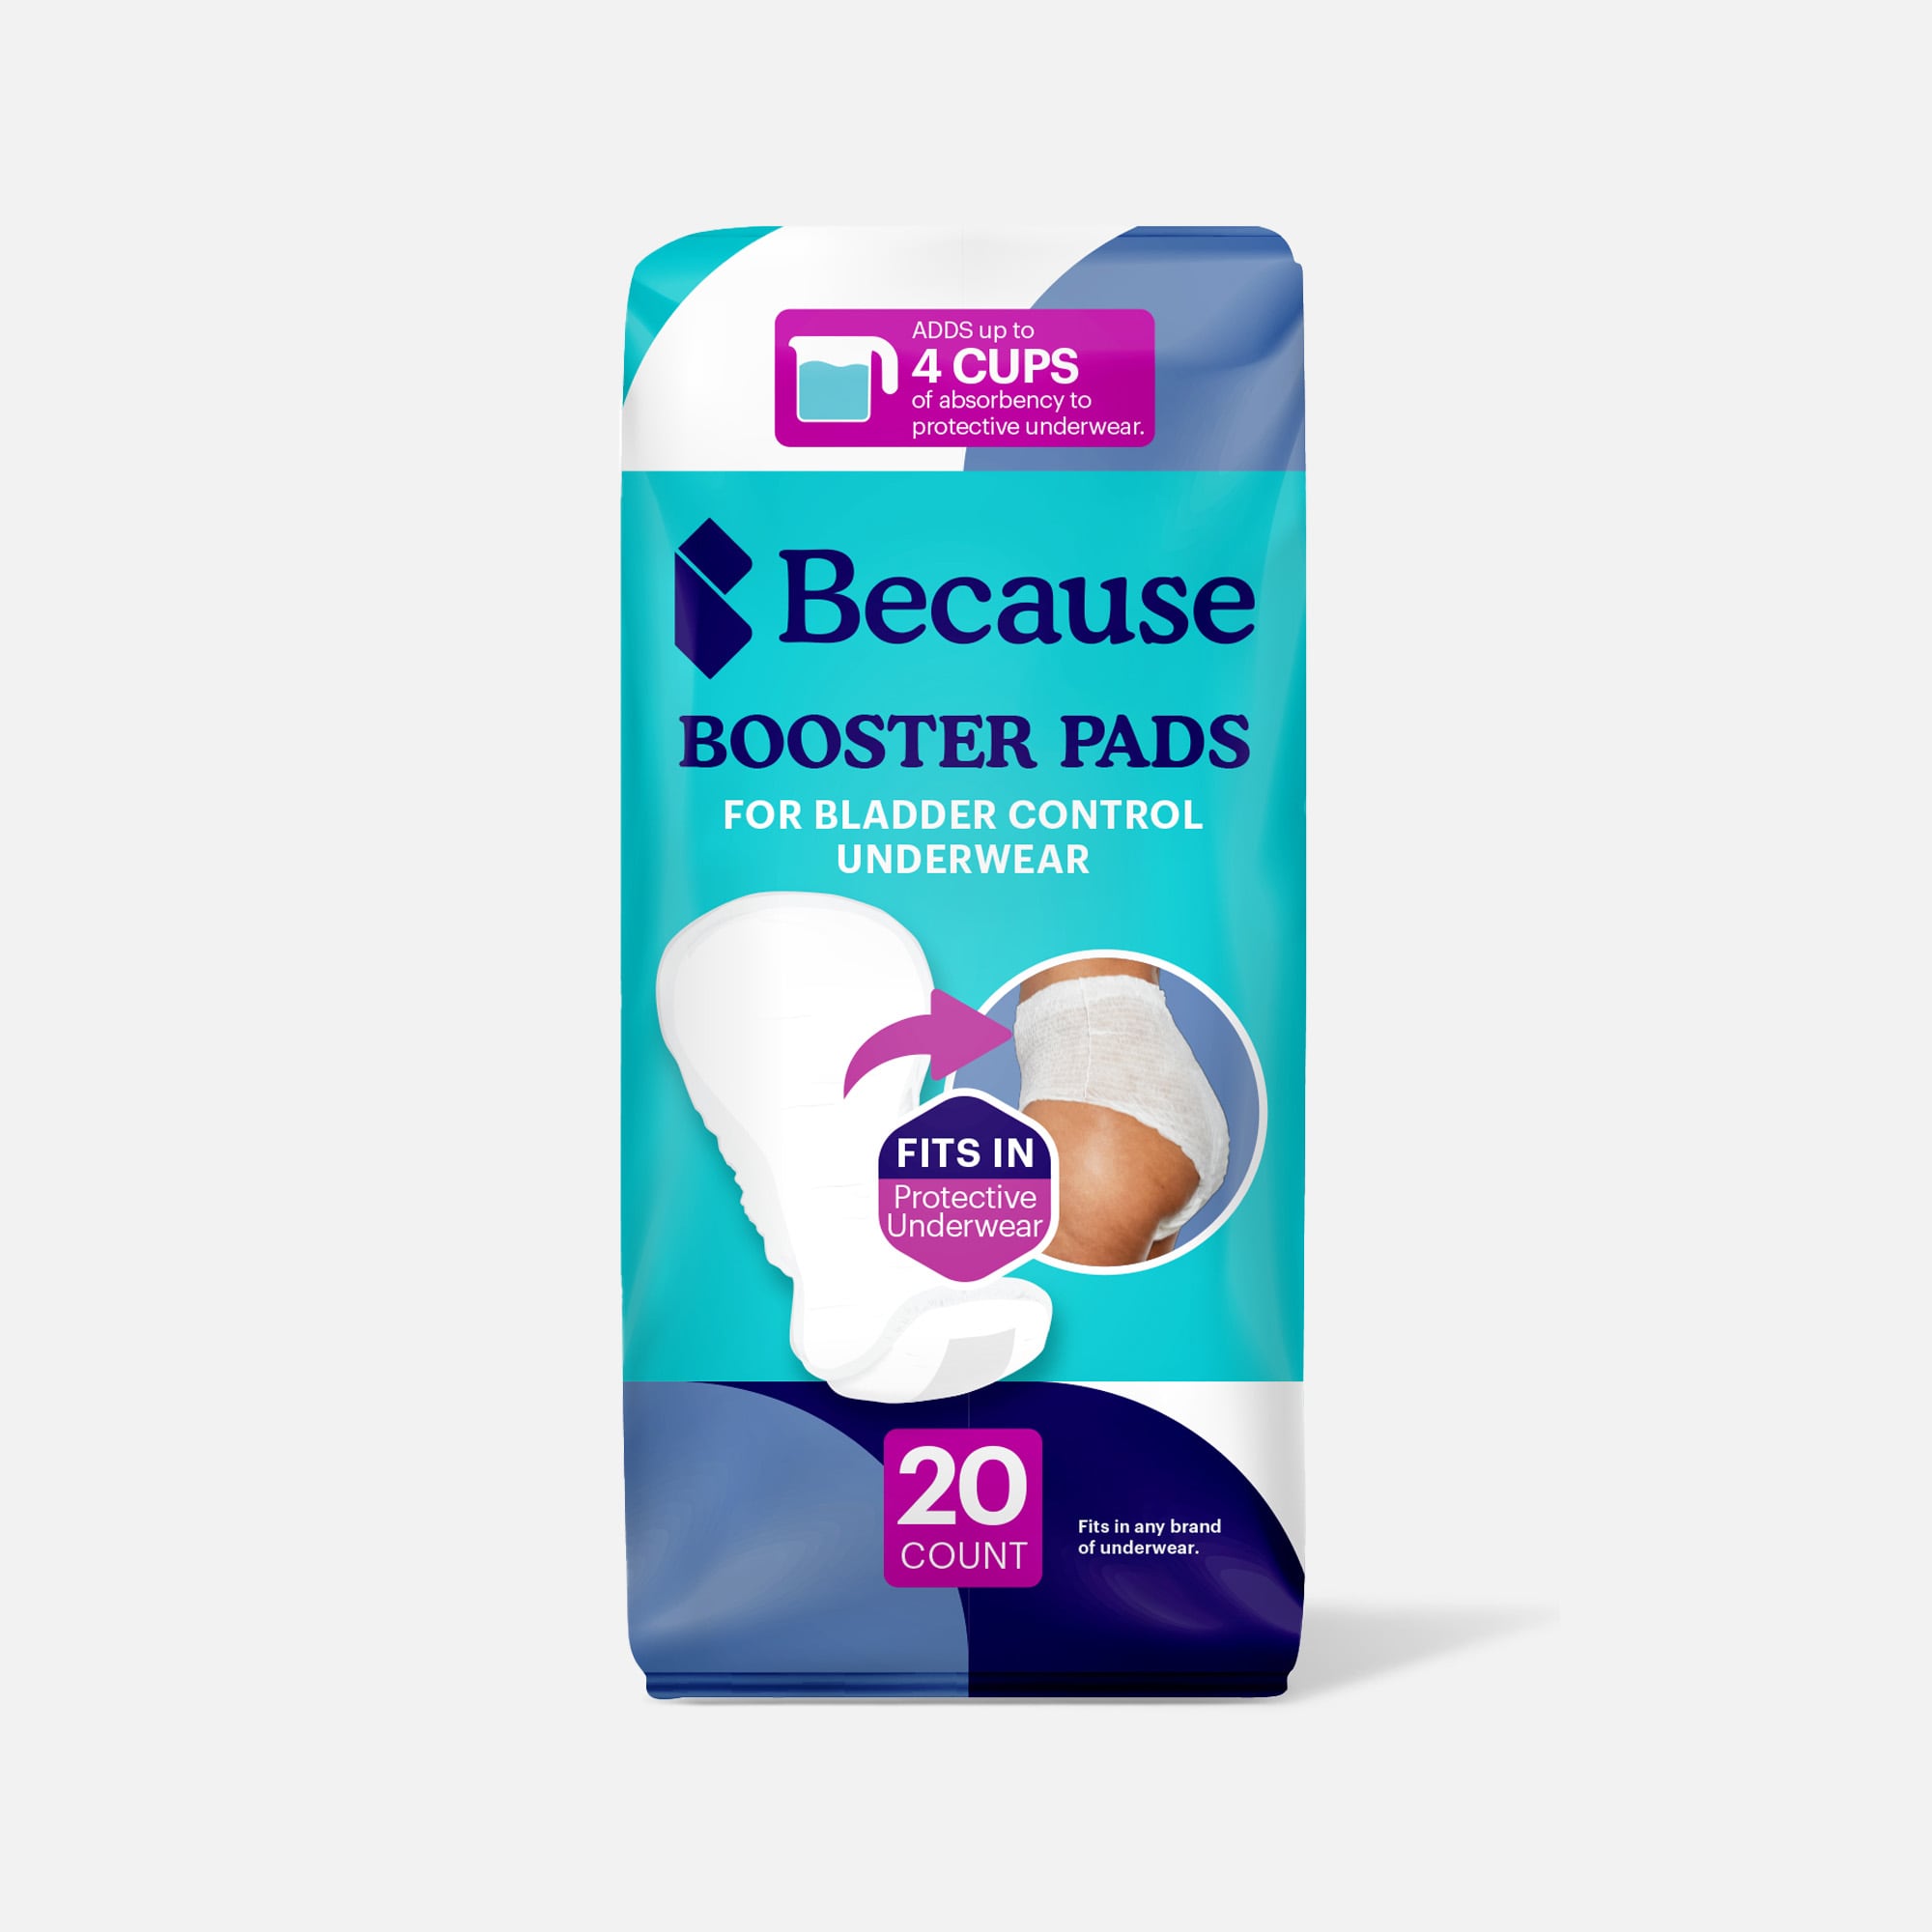 HSA Eligible  Because Booster Pads for Bladder Control Underwear, 20 ct.